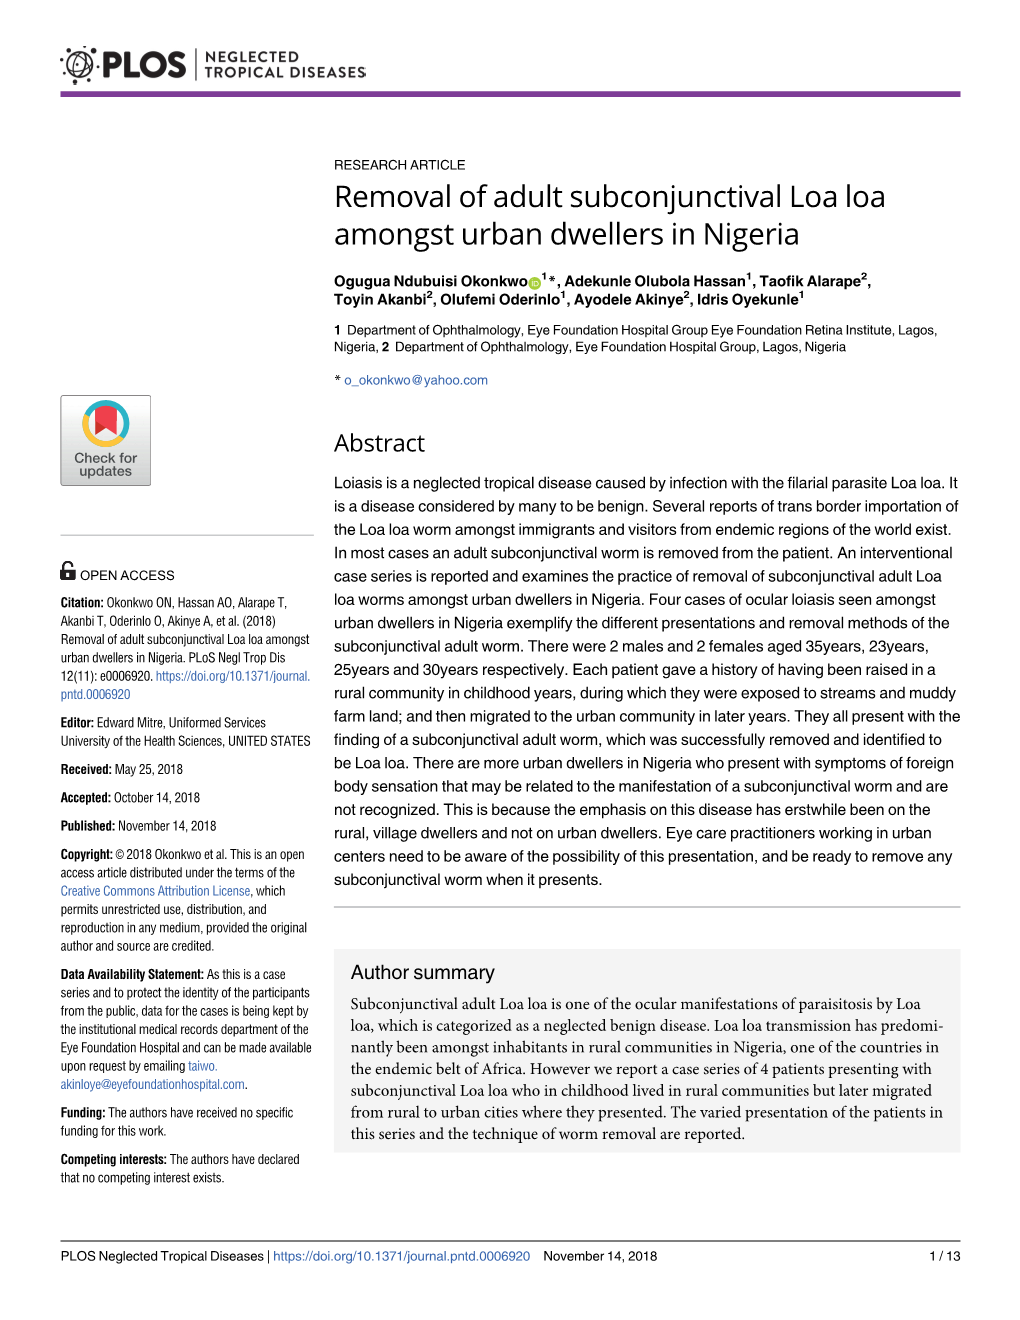 Removal of Adult Subconjunctival Loa Loa Amongst Urban Dwellers in Nigeria